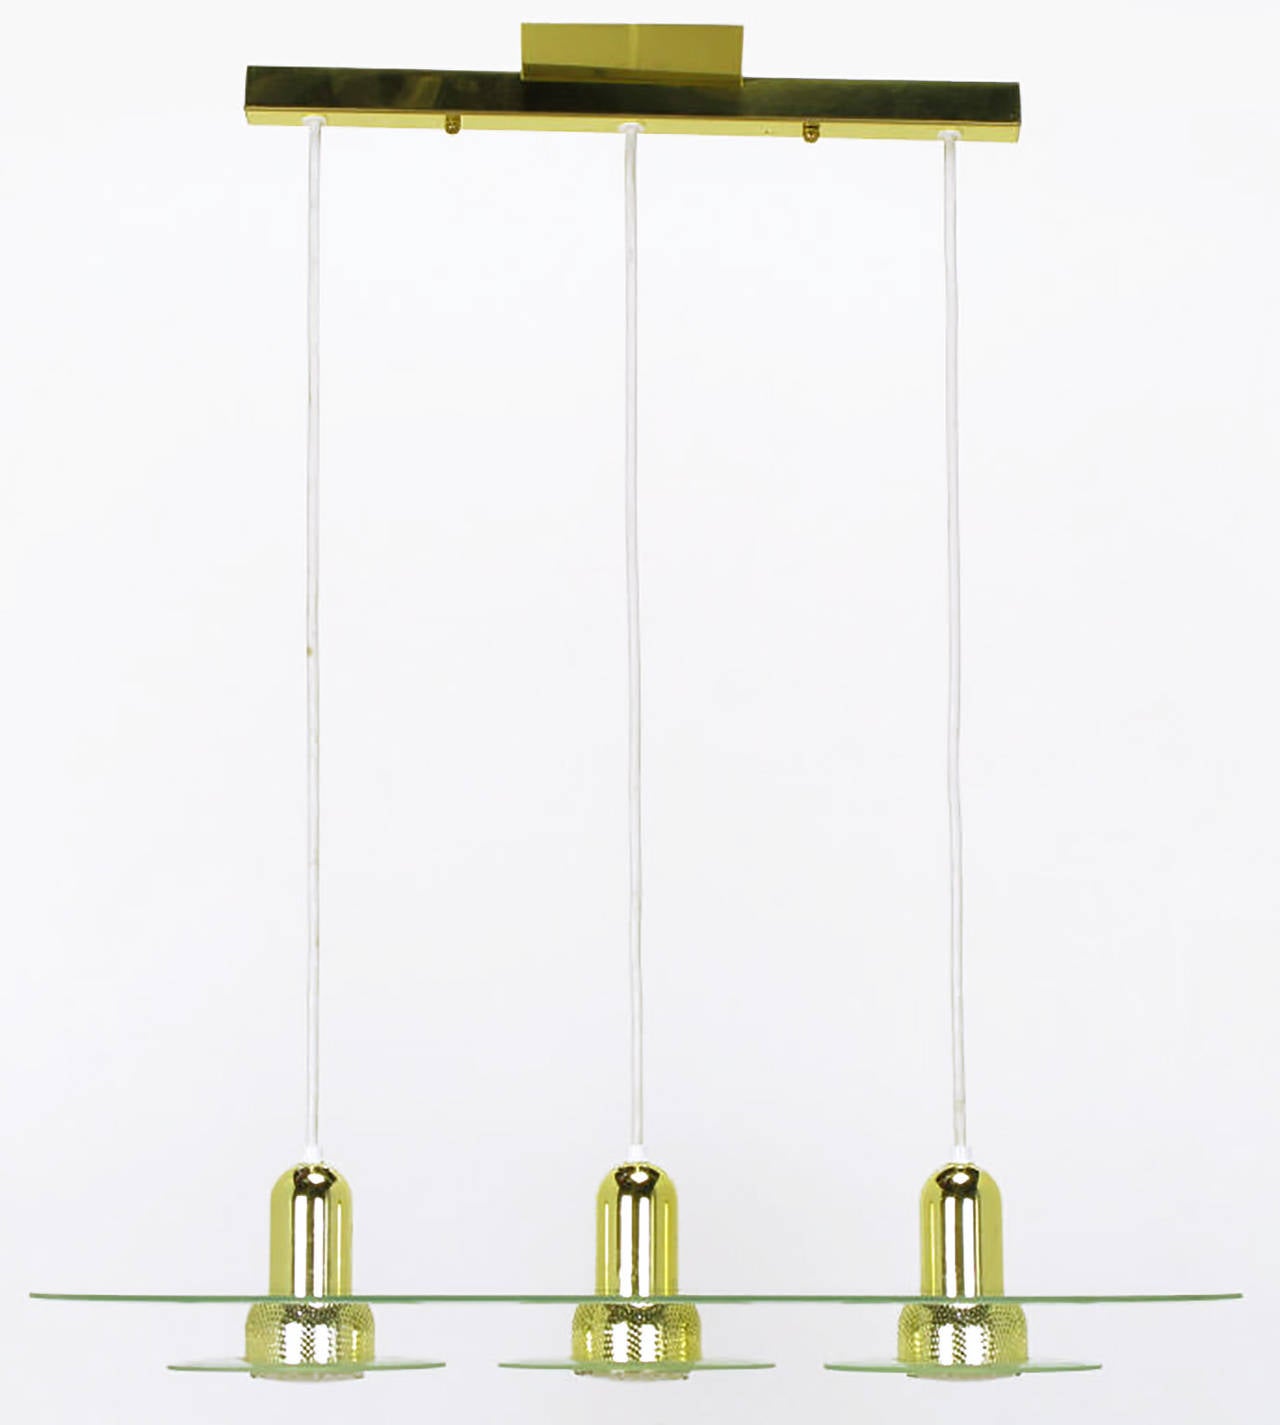 Postmodern three-light brass pendants with etched glass round bobeches and larger race track oval etched glass surround. White corded electrical cable connects to the brass long tray canopy. Perfect for a kitchen island, breakfast nook or pool table.